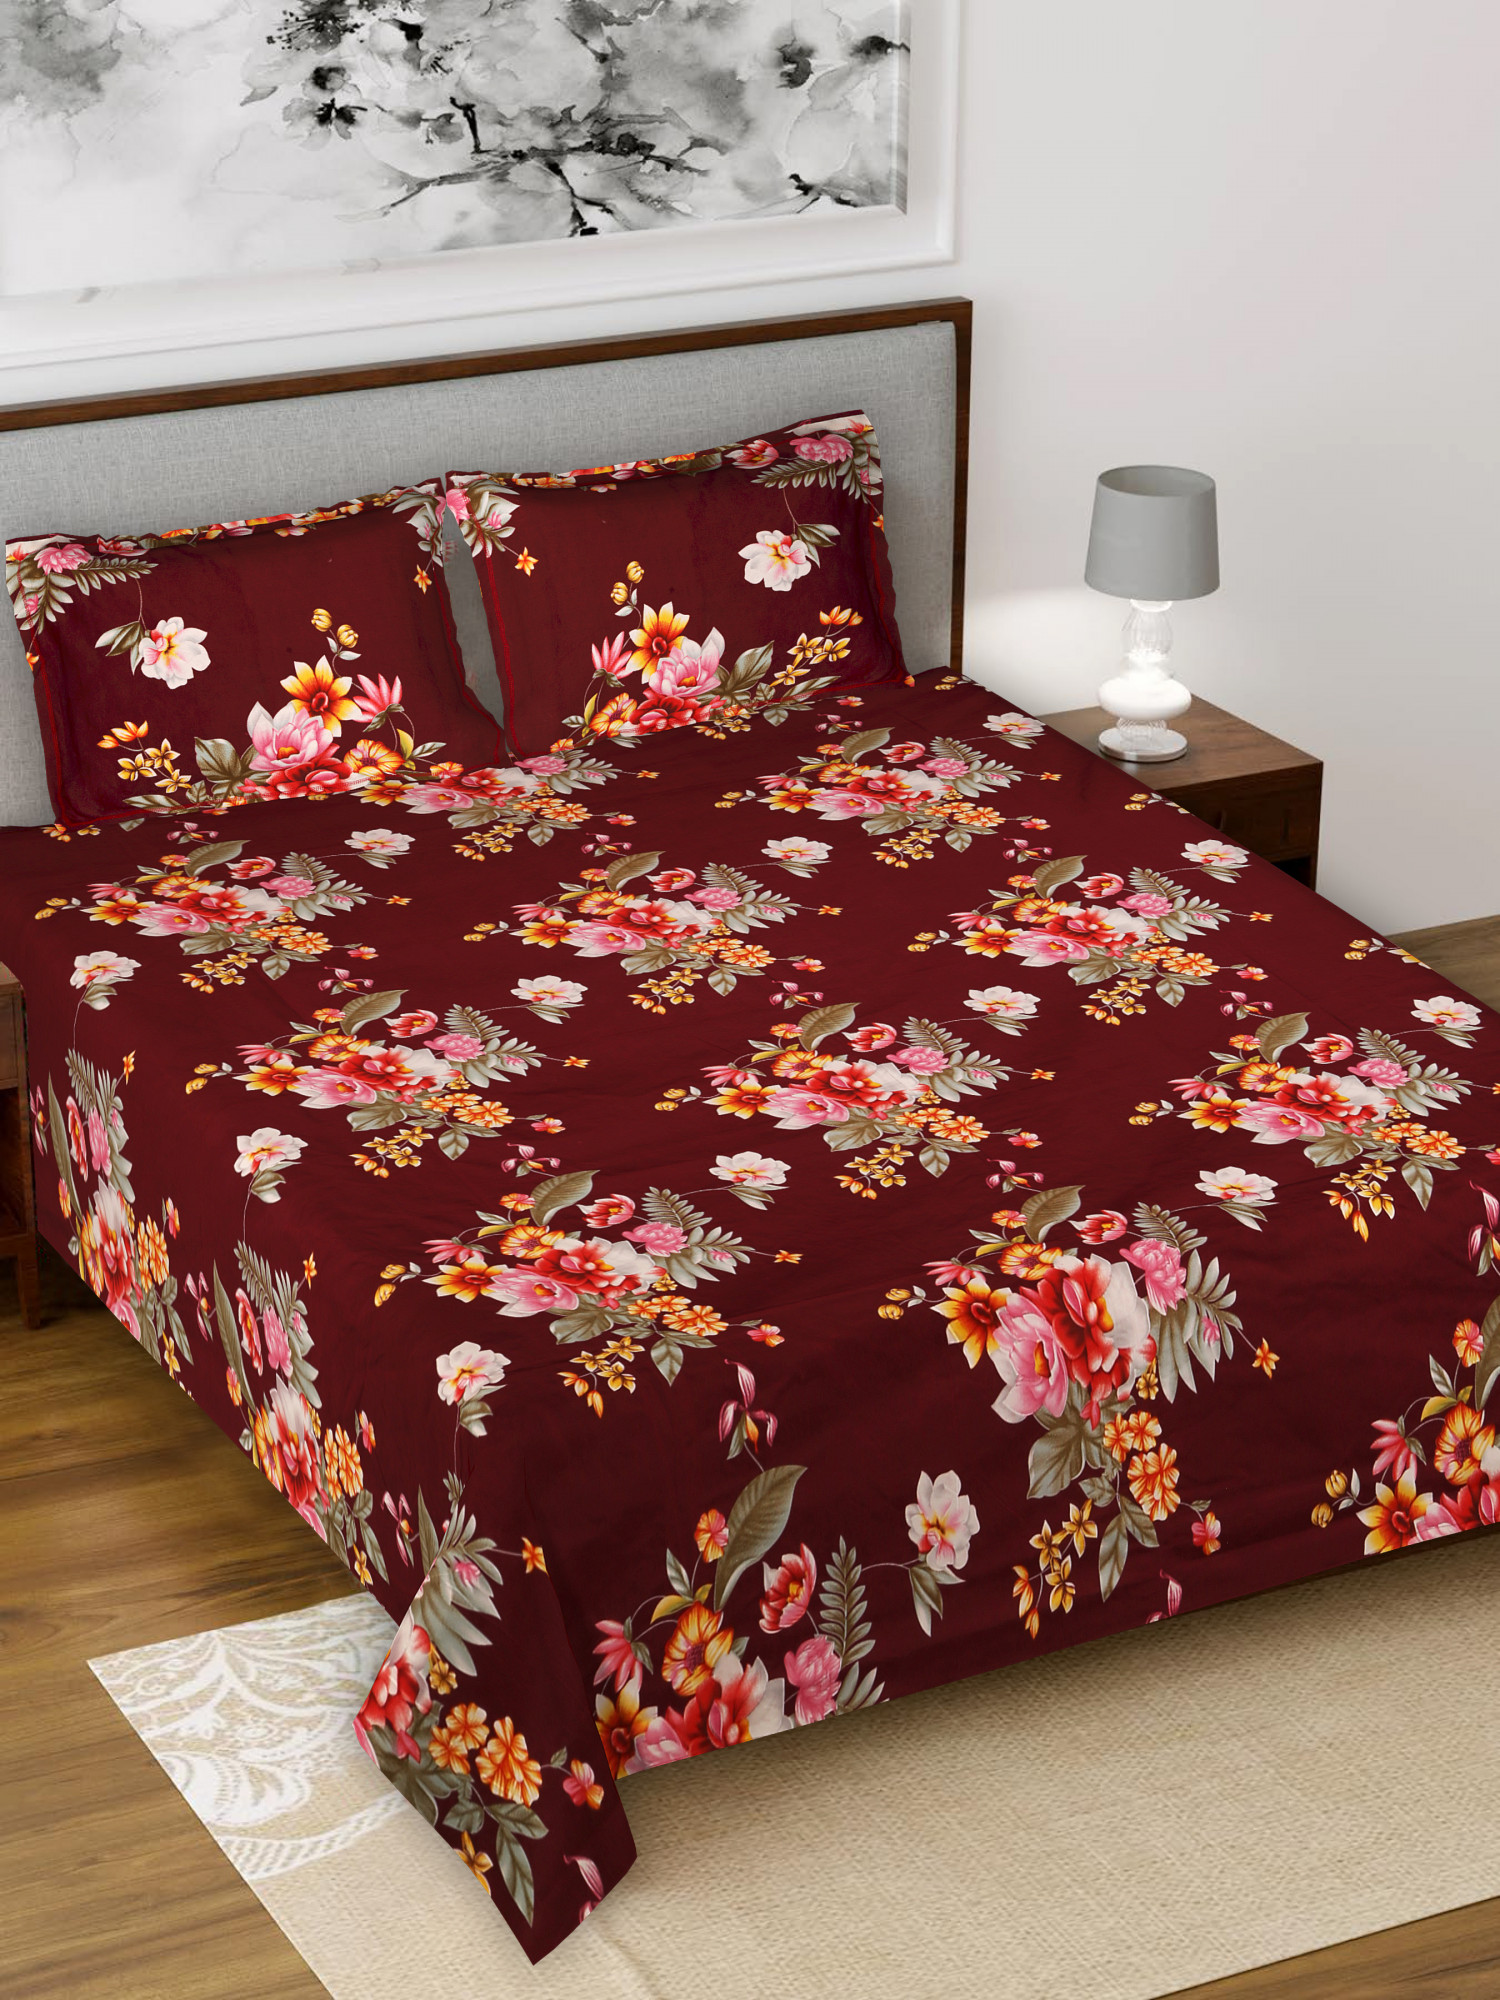 Kuber Industries Flower Print Glace Cotton 144 TC King Size Double Bedsheet with 2 Pillow Covers (Maroon)